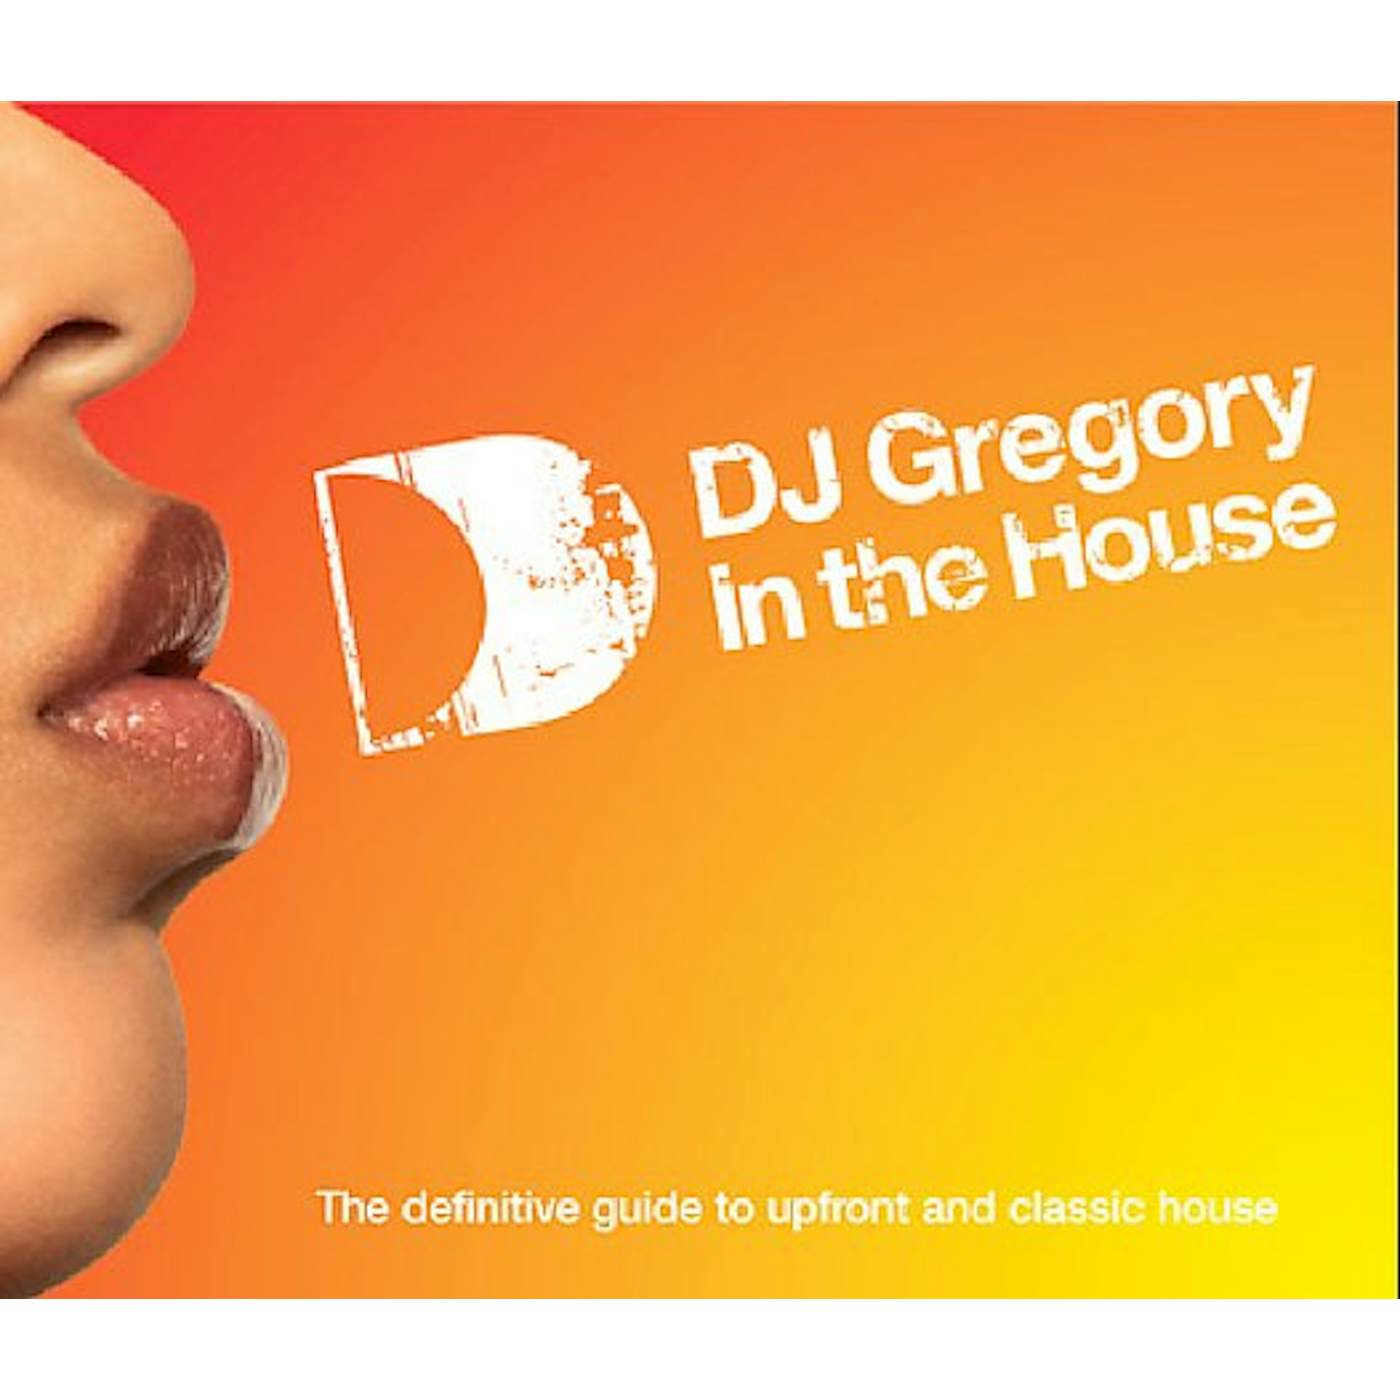 DJ Gregory IN THE HOUSE 2 Vinyl Record